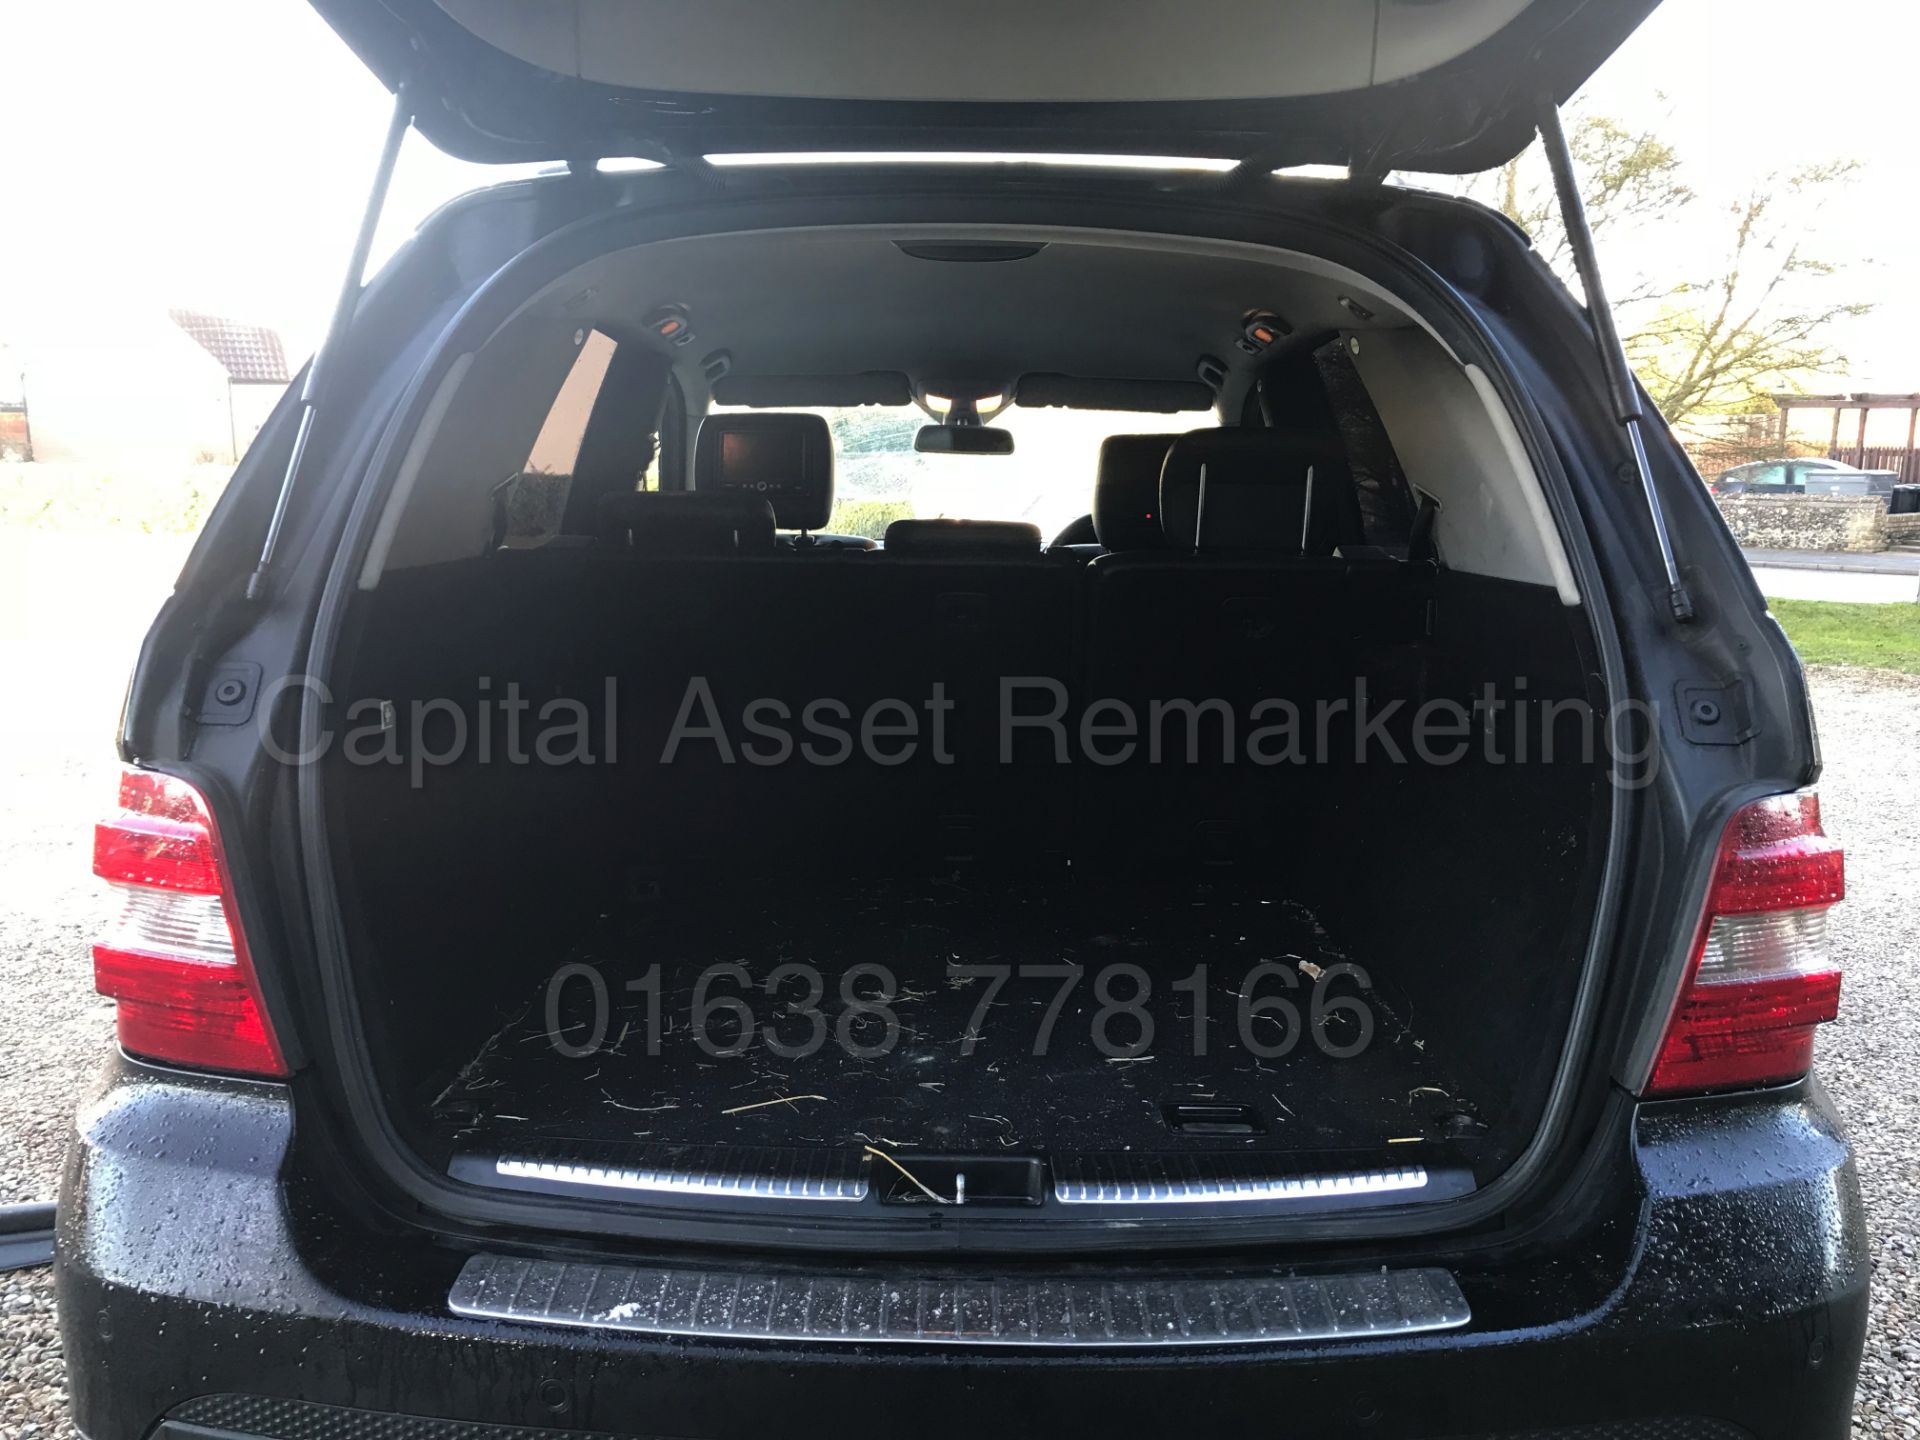 (On Sale) MERCEDES-BENZ ML 320 CDI 'SPECIAL EQUIPMENT' (2008 MODEL) '3.0 DIESEL - AUTO - LEATHER’ - Image 18 of 37